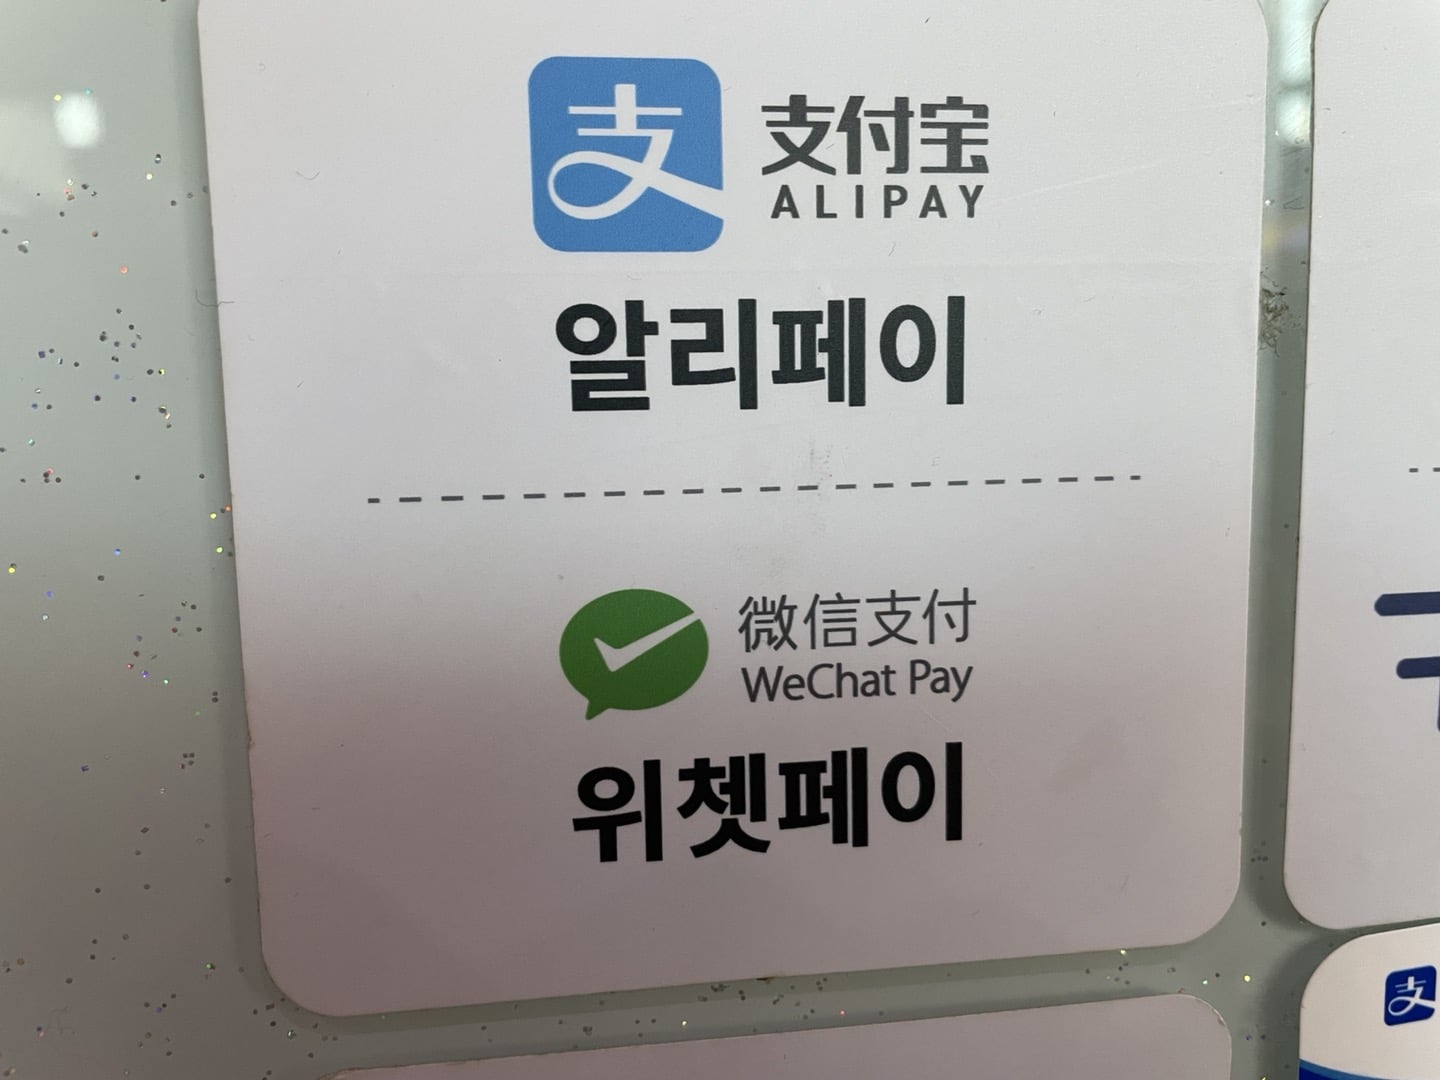 A sign on a store in Seoul, South Korea, shows that Alipay and WeChat Pay are accepted.